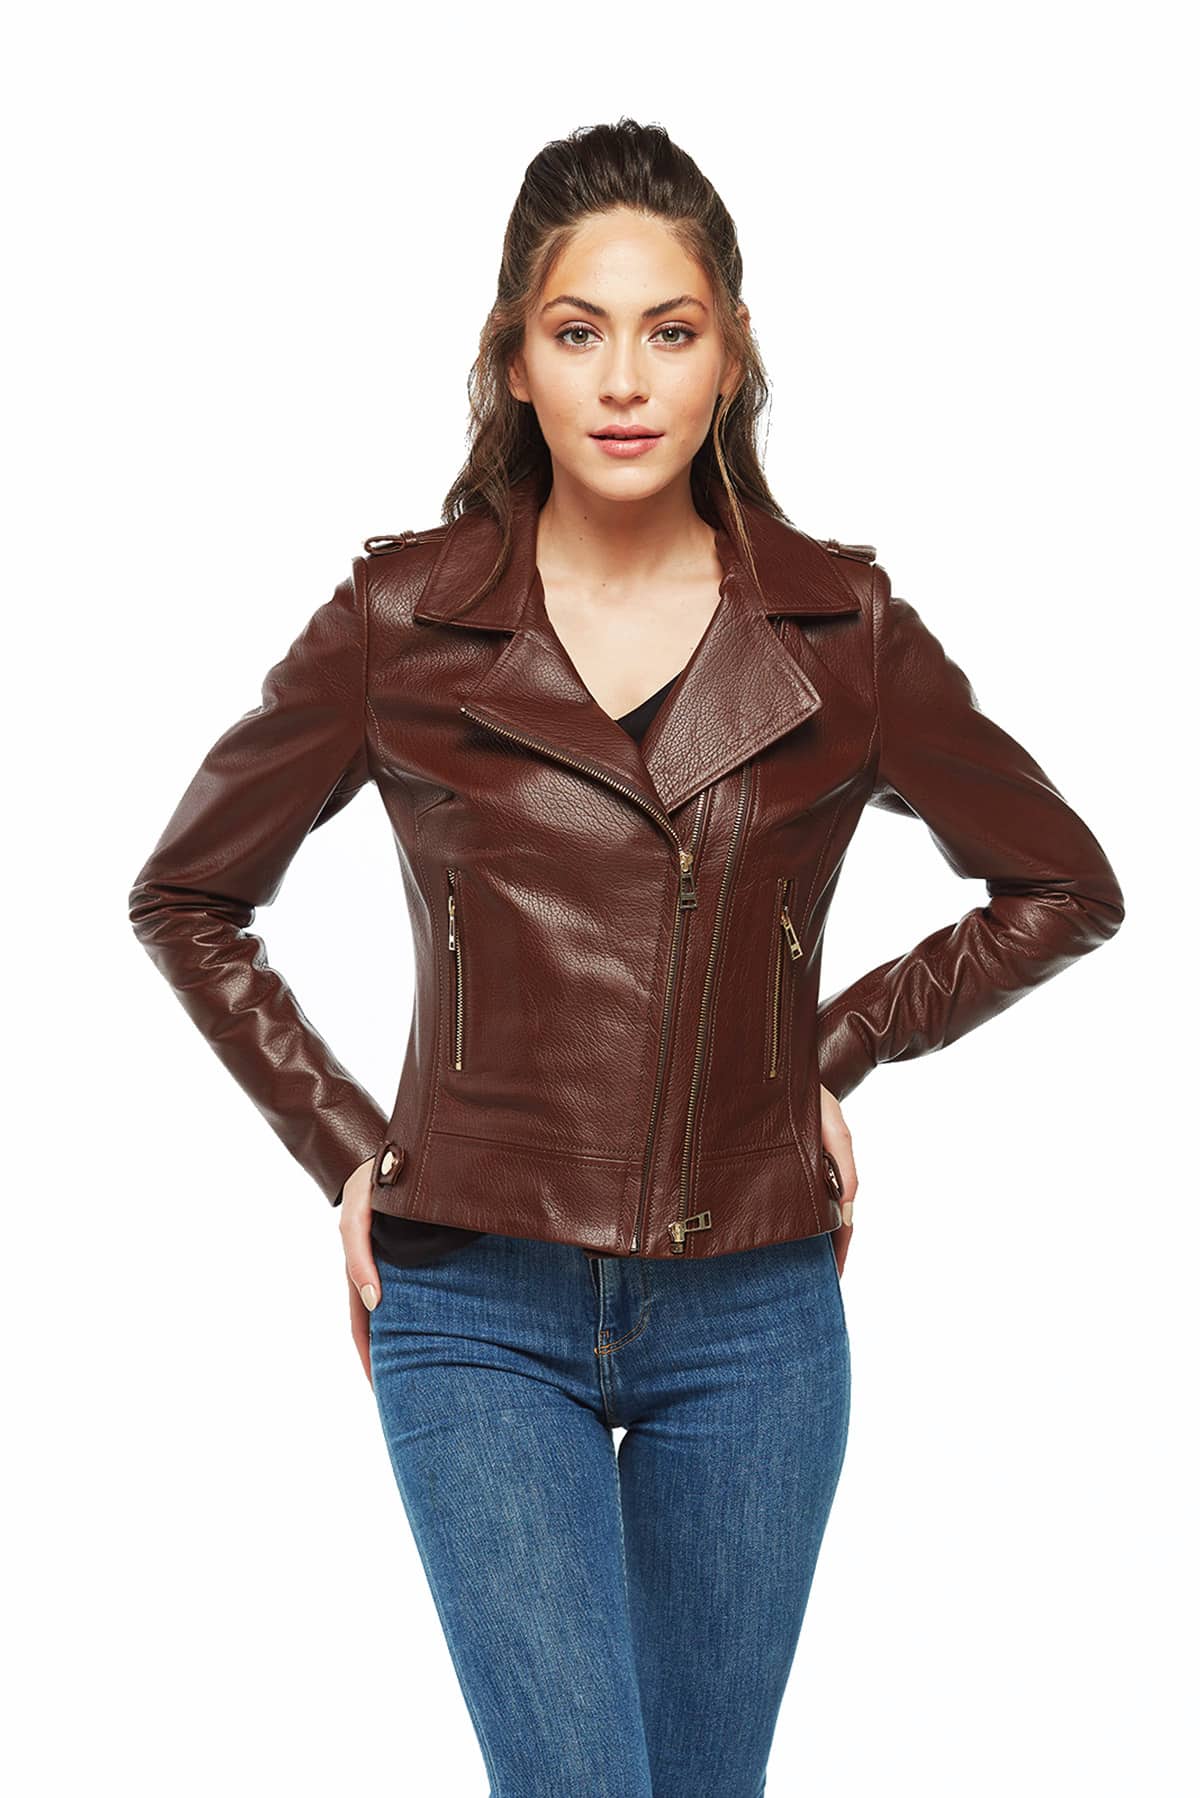 Vivian Women's 100 % Real Brown Leather Classic Jacket